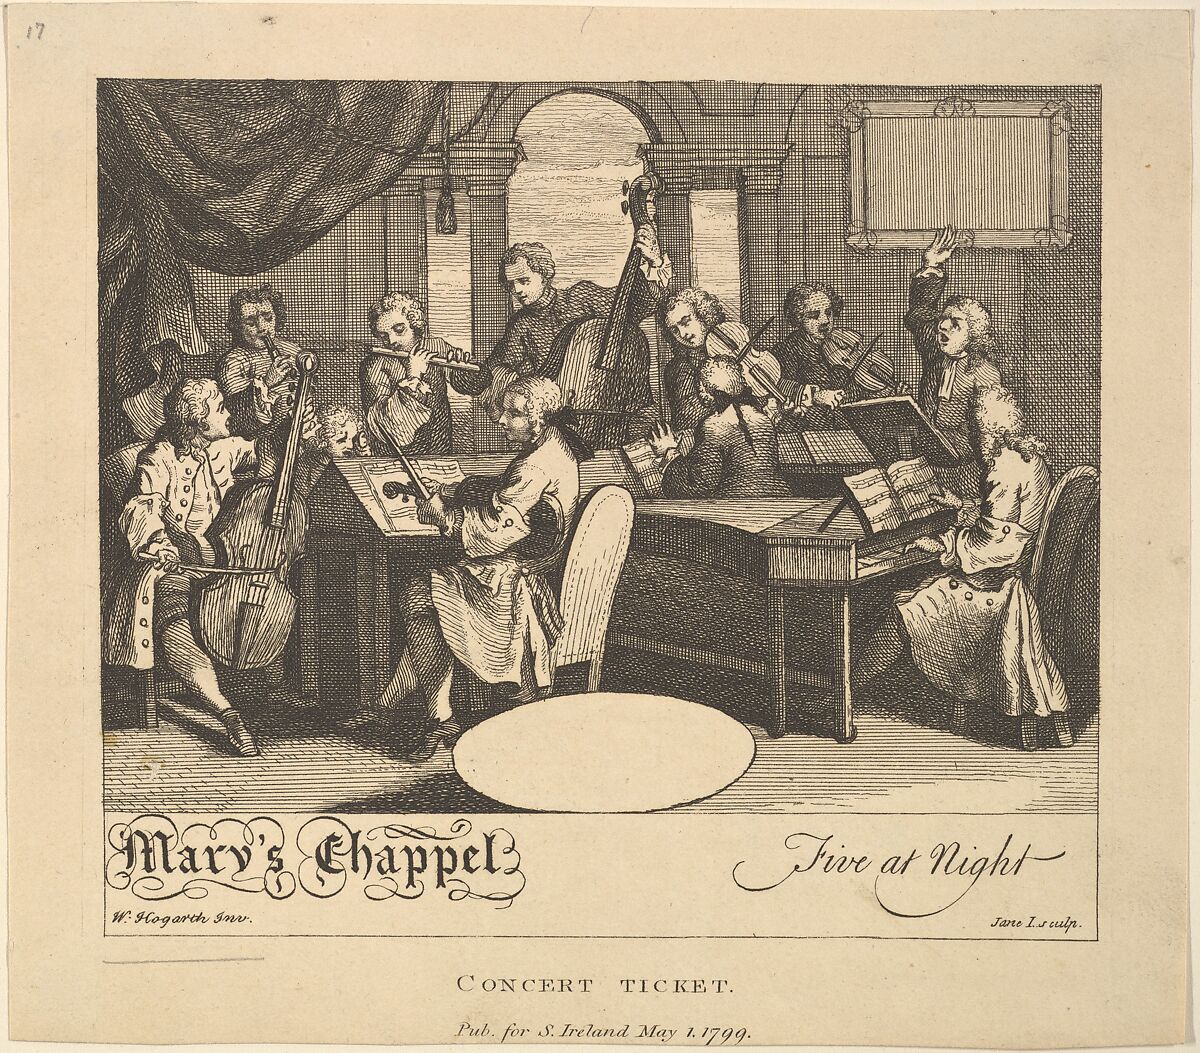 Concert Ticket - Mary's Chappel, Five at Night, Jane Ireland (British, active 1790s), Engraving 